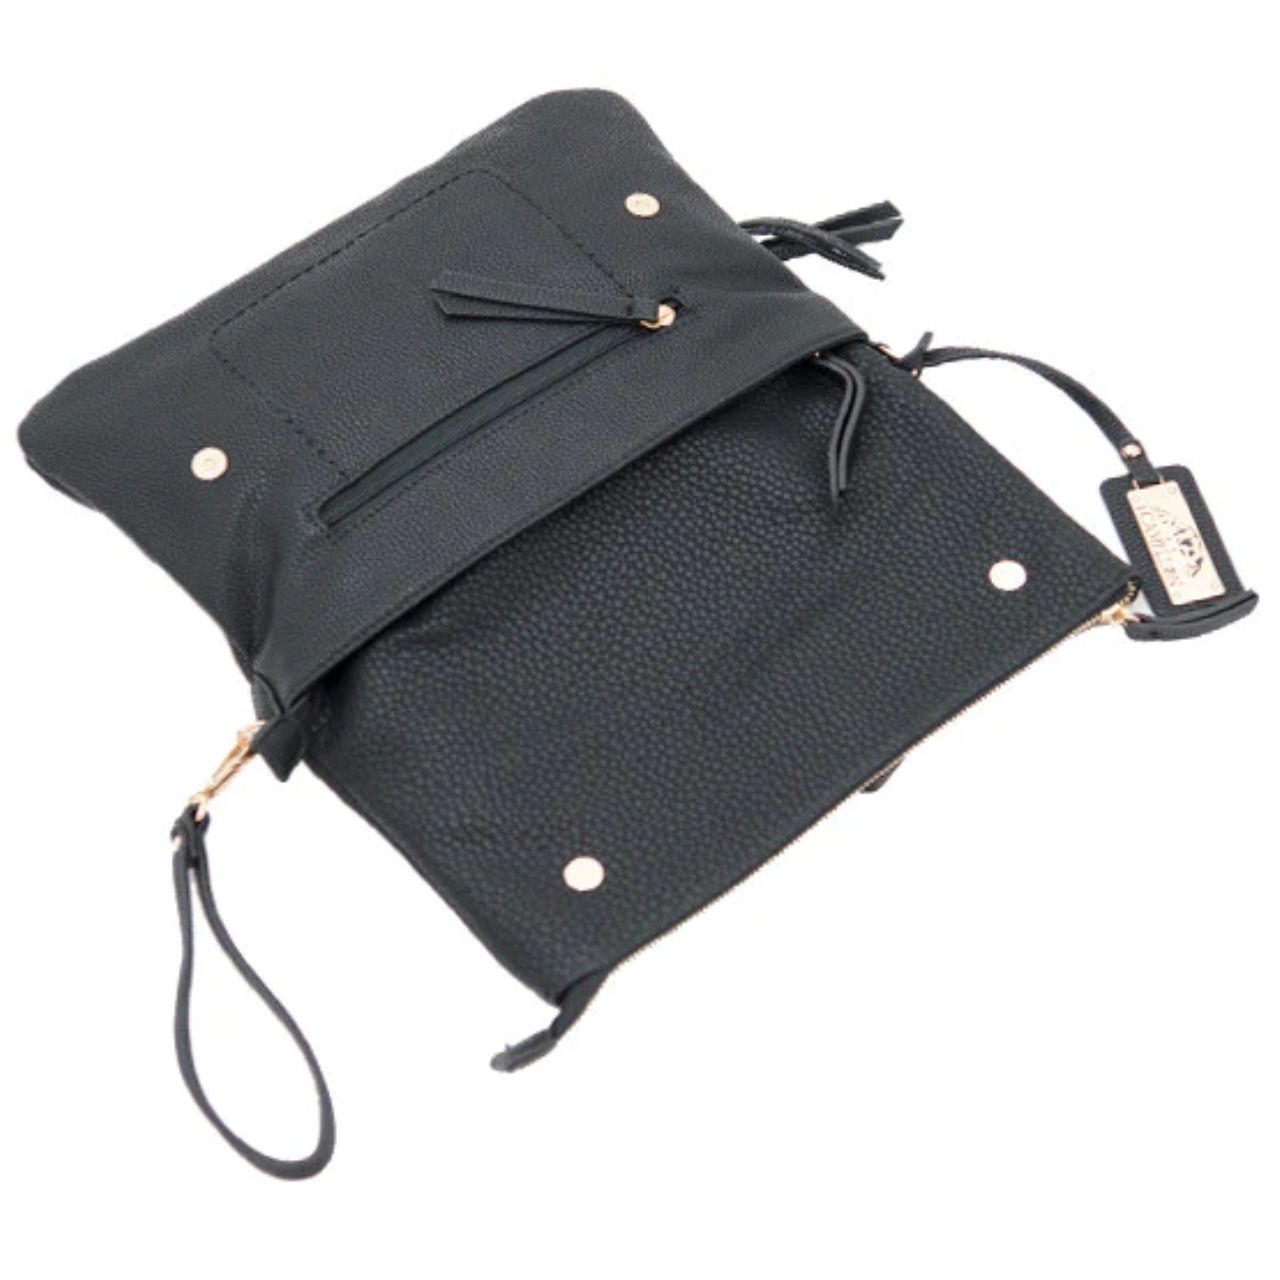 A very versatile concealed carry purse